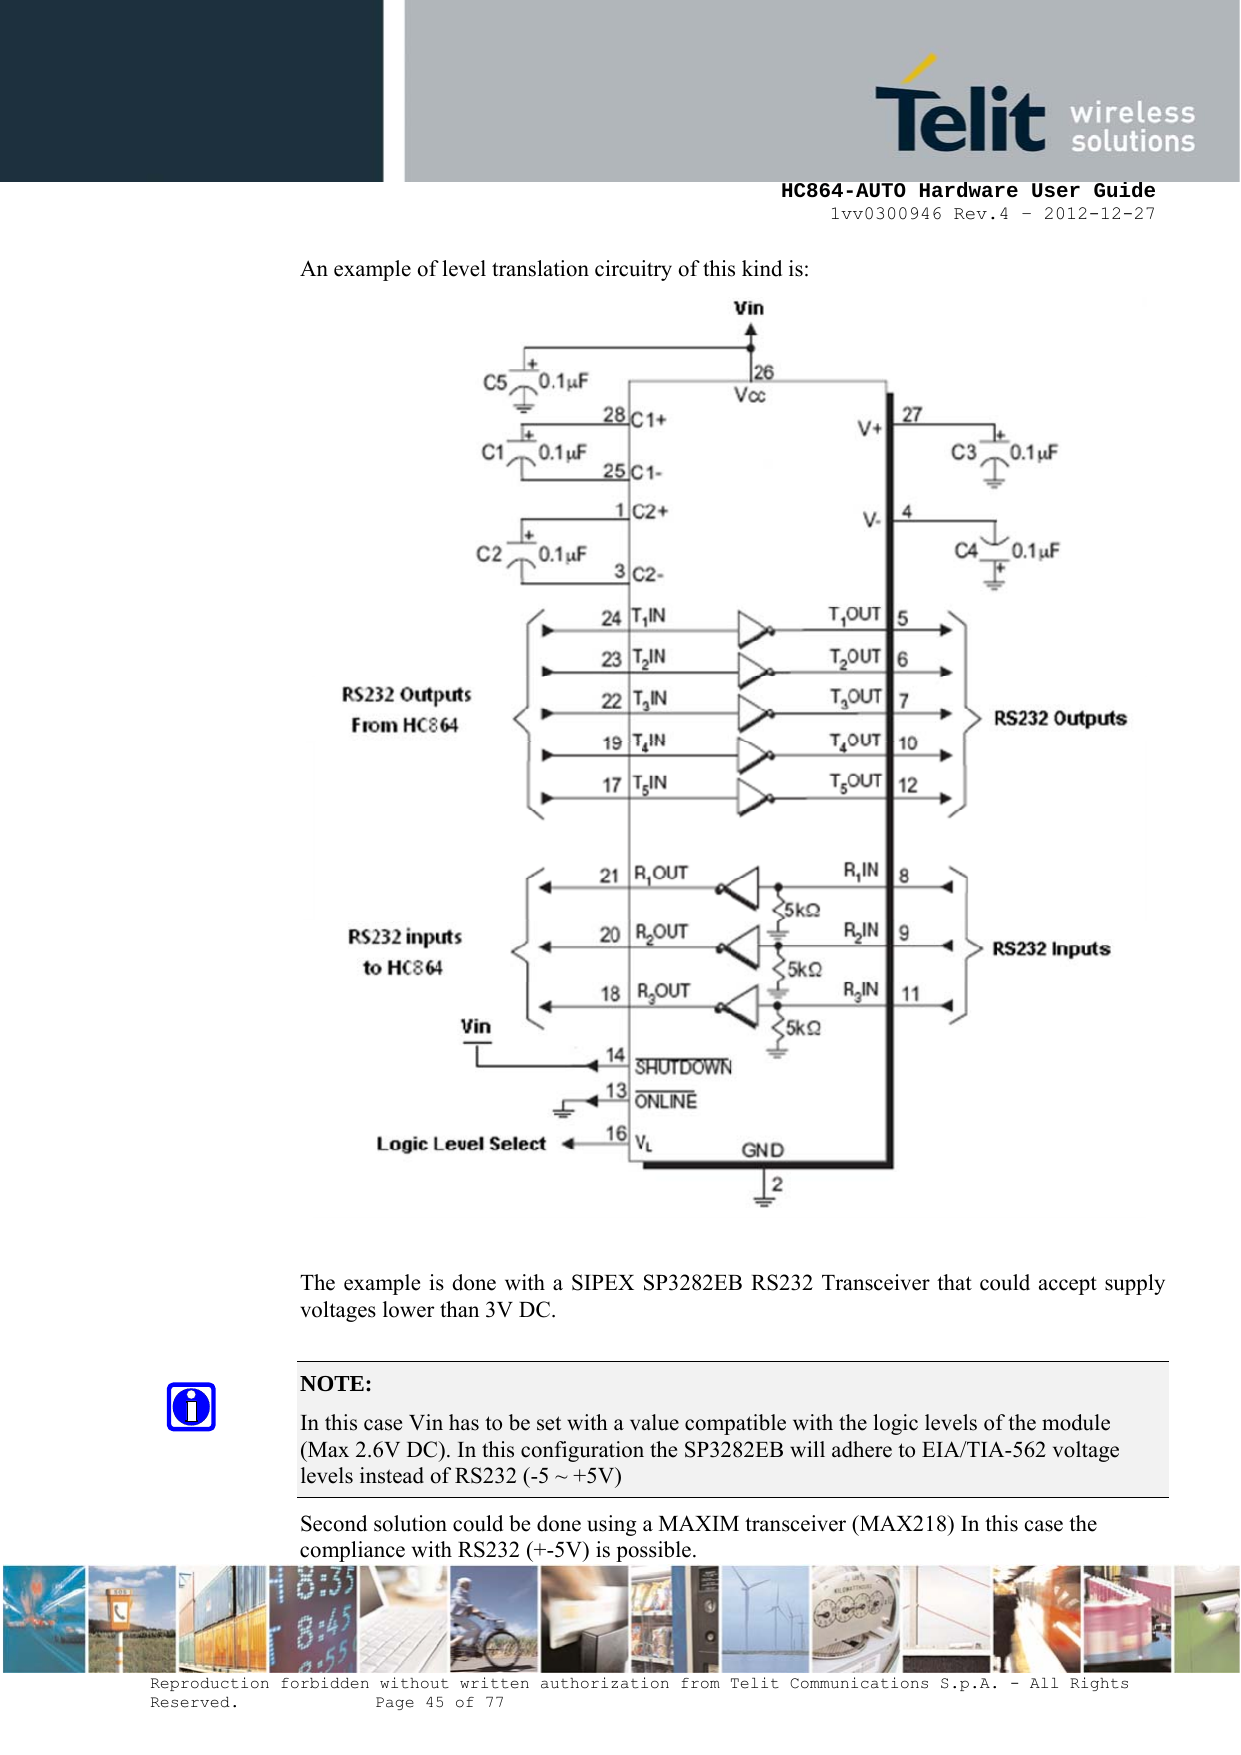     HC864-AUTO Hardware User Guide 1vv0300946 Rev.4 – 2012-12-27 Reproduction forbidden without written authorization from Telit Communications S.p.A. - All Rights Reserved.    Page 45 of 77  An example of level translation circuitry of this kind is:   The example is done with a SIPEX SP3282EB RS232 Transceiver that could accept supply voltages lower than 3V DC.  NOTE:  In this case Vin has to be set with a value compatible with the logic levels of the module (Max 2.6V DC). In this configuration the SP3282EB will adhere to EIA/TIA-562 voltage levels instead of RS232 (-5 ~ +5V)     Second solution could be done using a MAXIM transceiver (MAX218) In this case the compliance with RS232 (+-5V) is possible. 